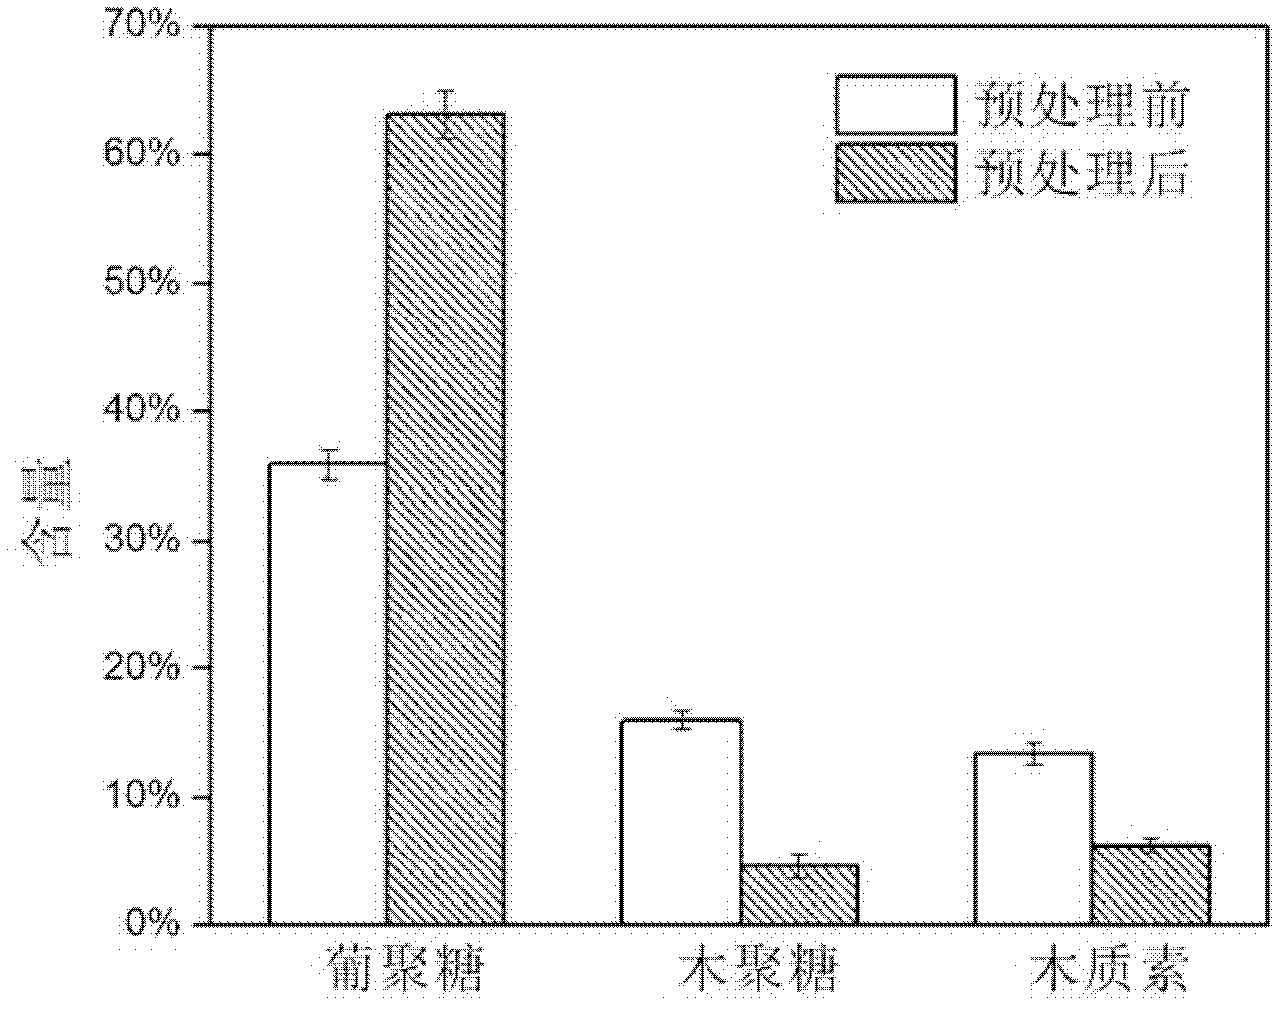 Method for improving lignocellulose enzymolysis and saccharification efficiency